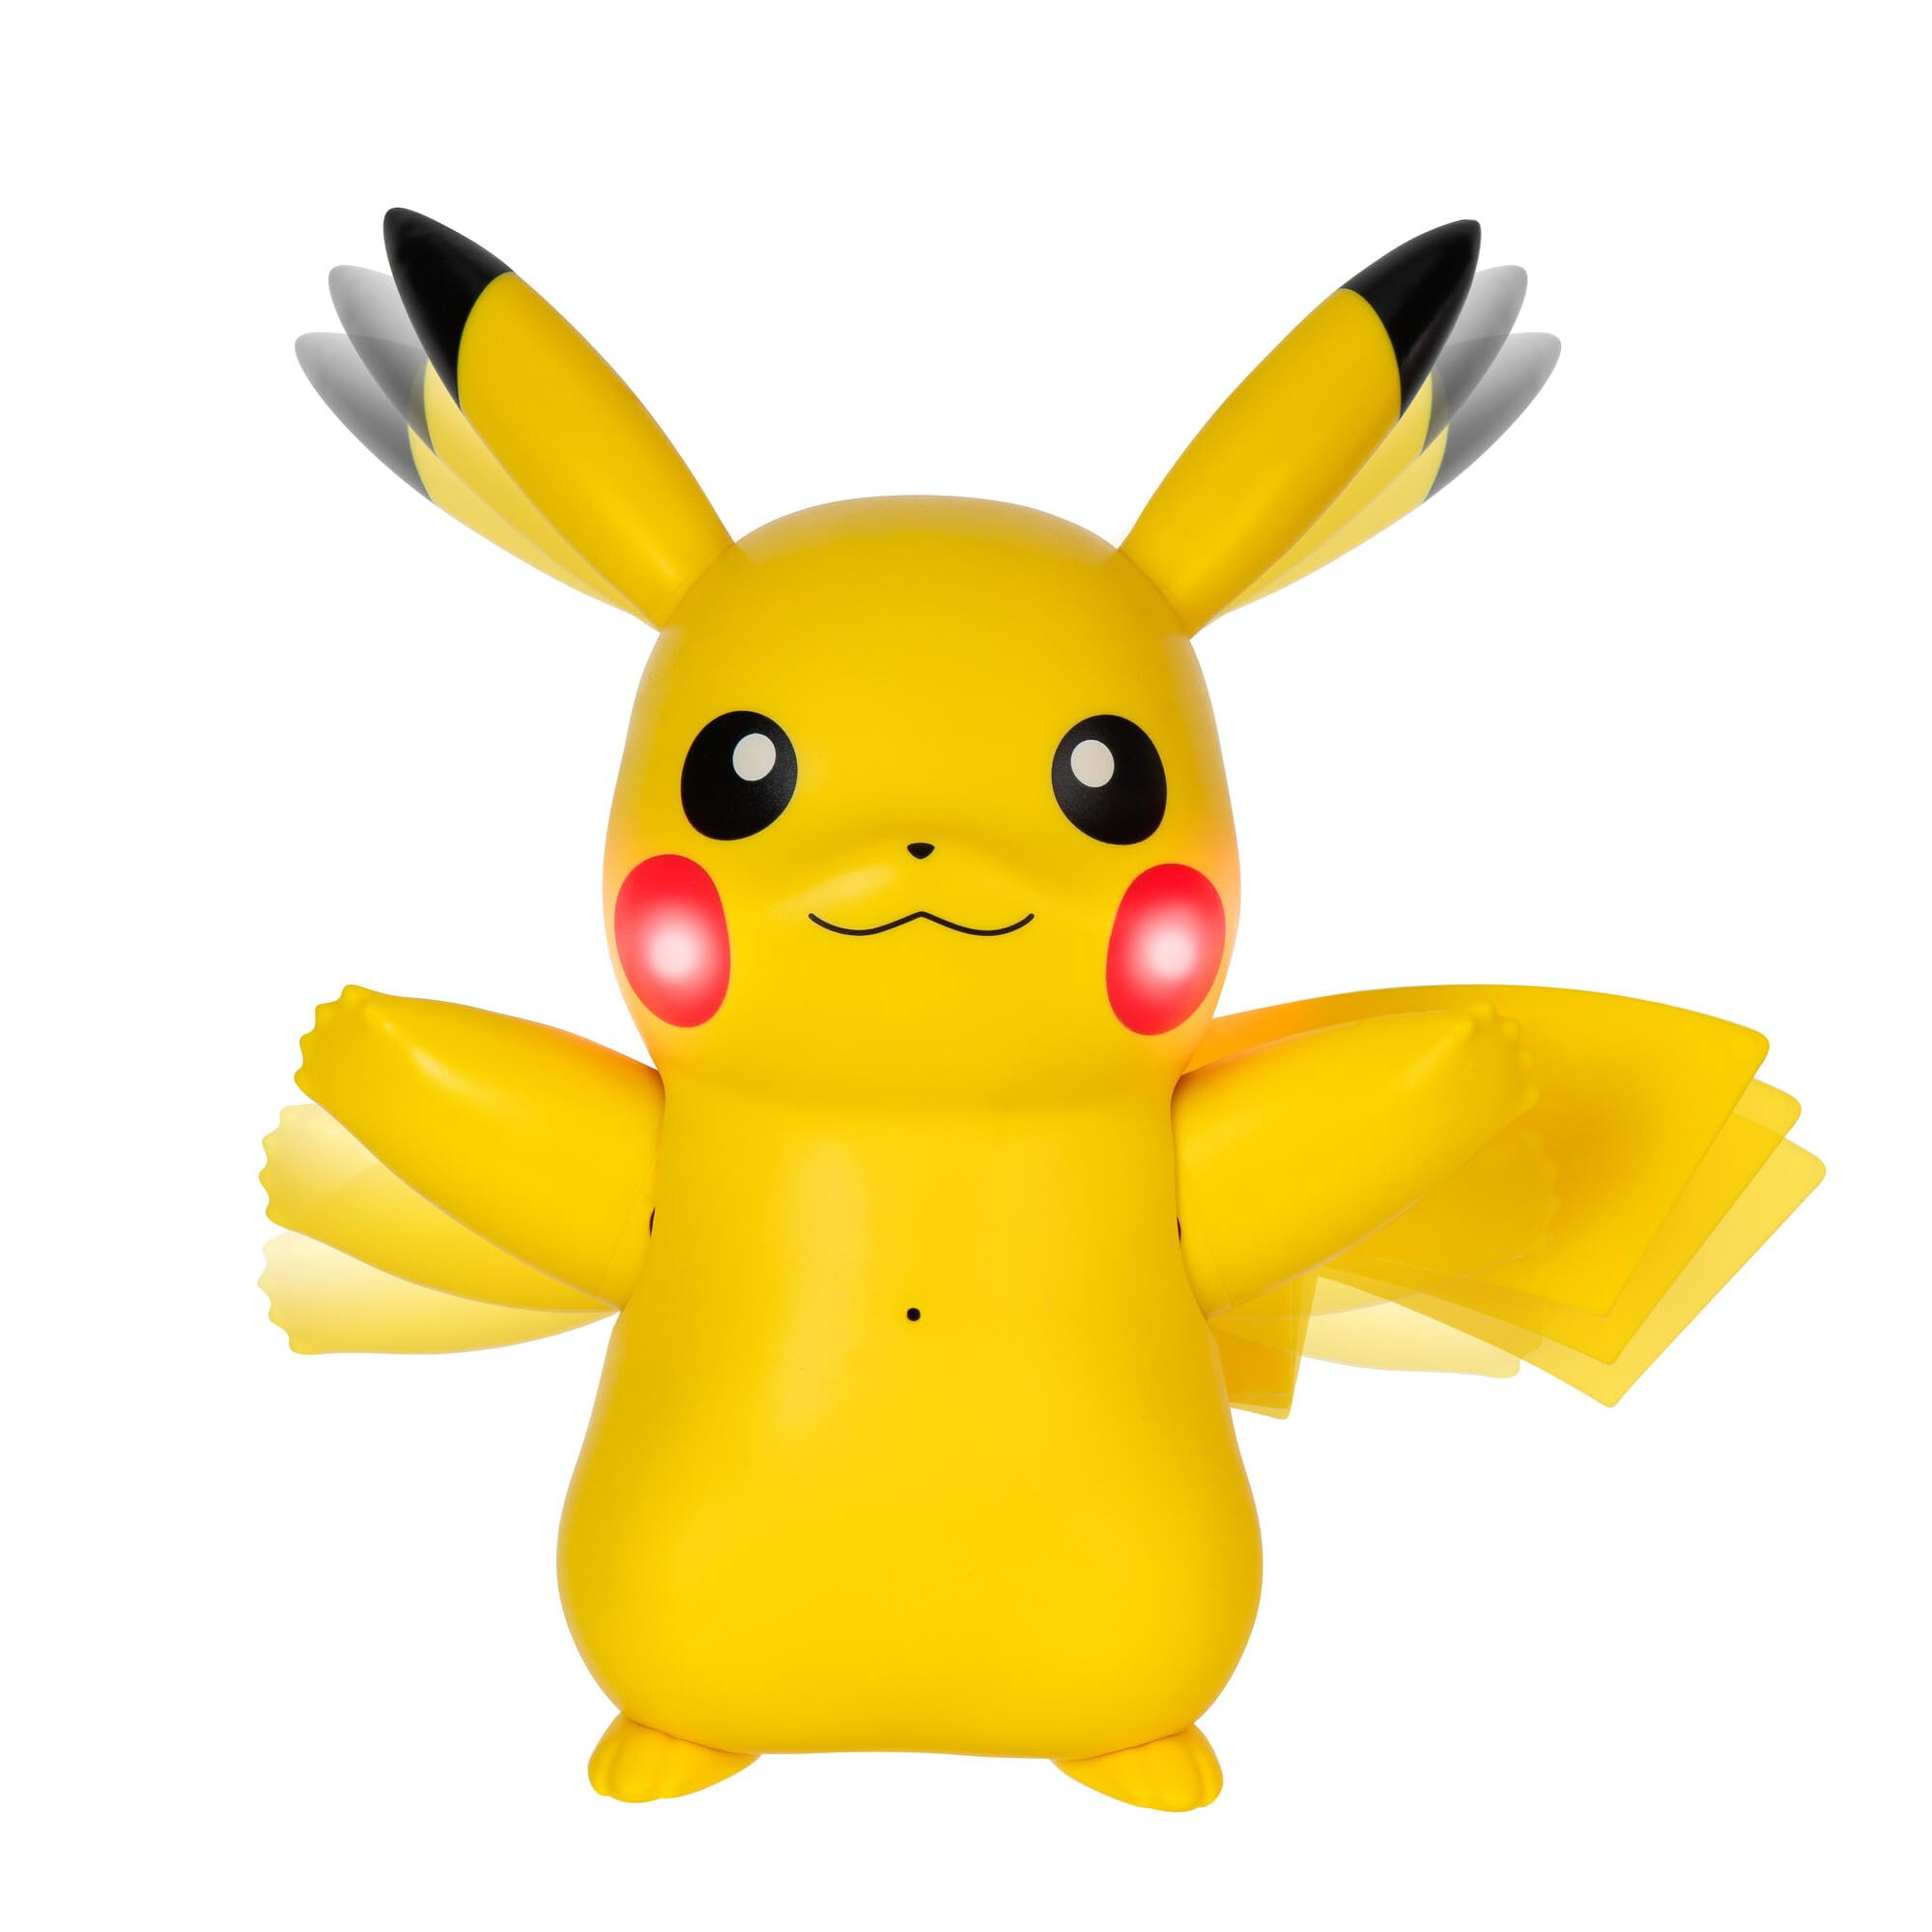 Pokemon Train and Play Deluxe Pikachu - 4.5-Inch Pikachu Figure with Lights, Sounds, and Moving Limbs Plus Interactive Accessories